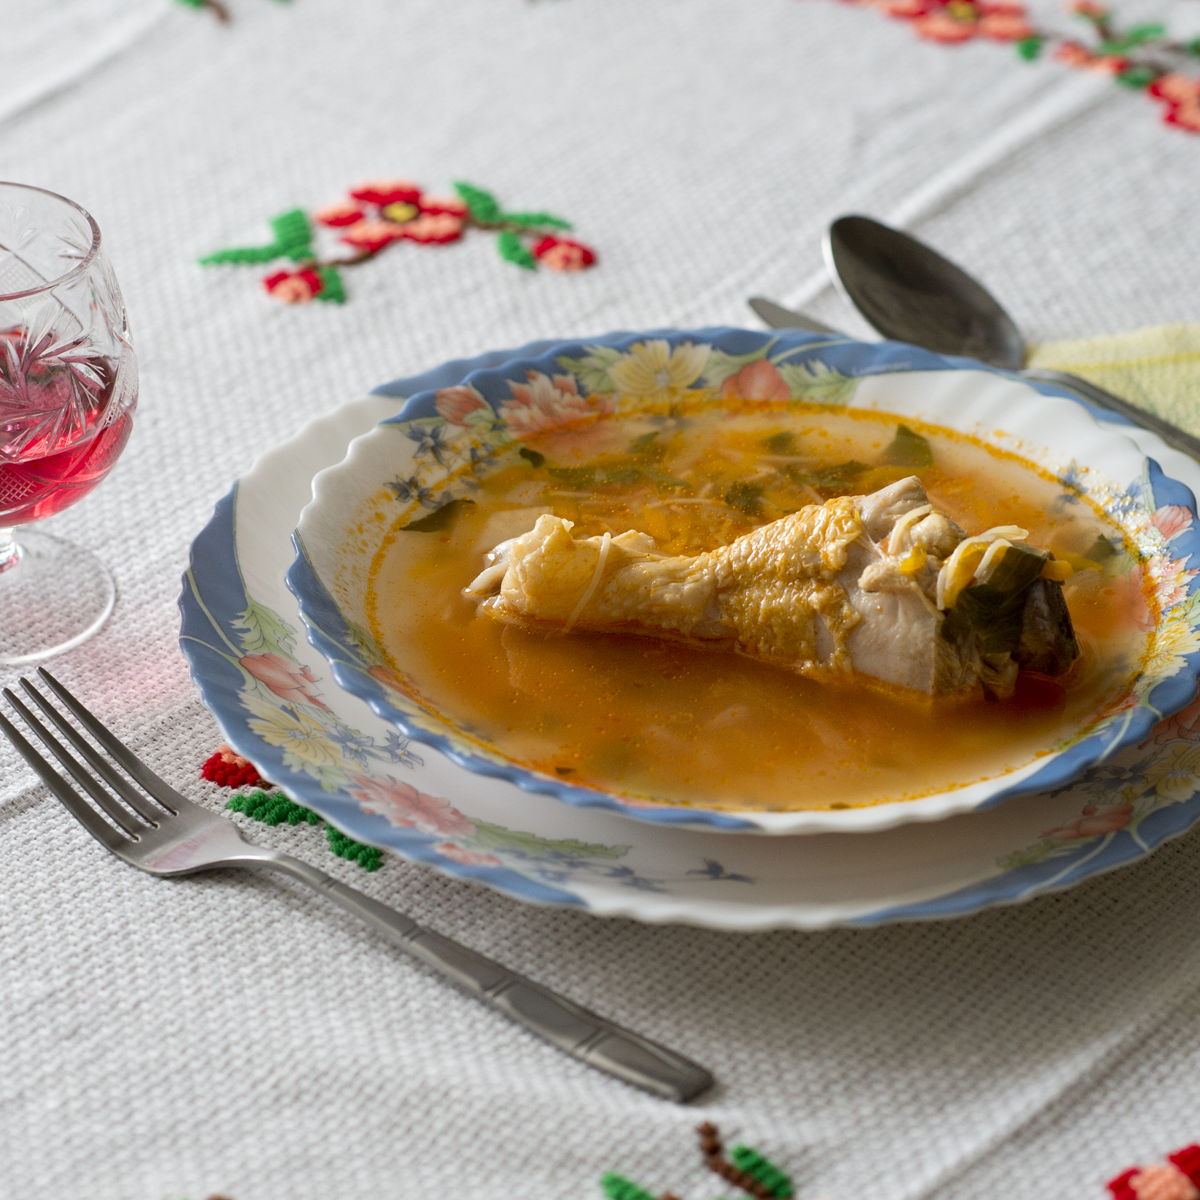 A very tasty traditional Romanian food